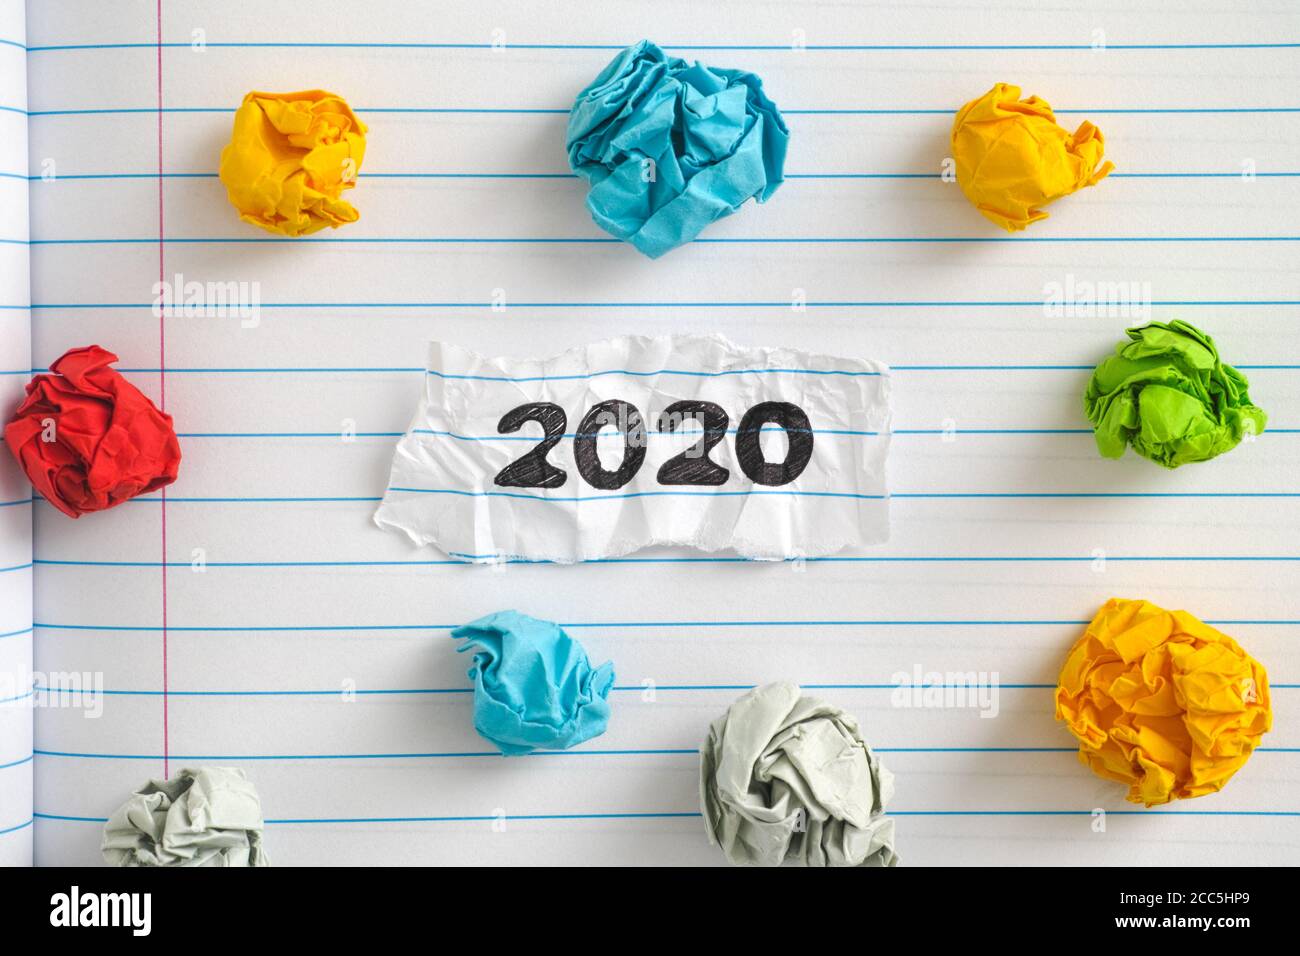 The year 2020. A piece of paper with the year 2020 written on it on a notebook sheet with some colorful crumpled paper balls around it. Close up. Stock Photo